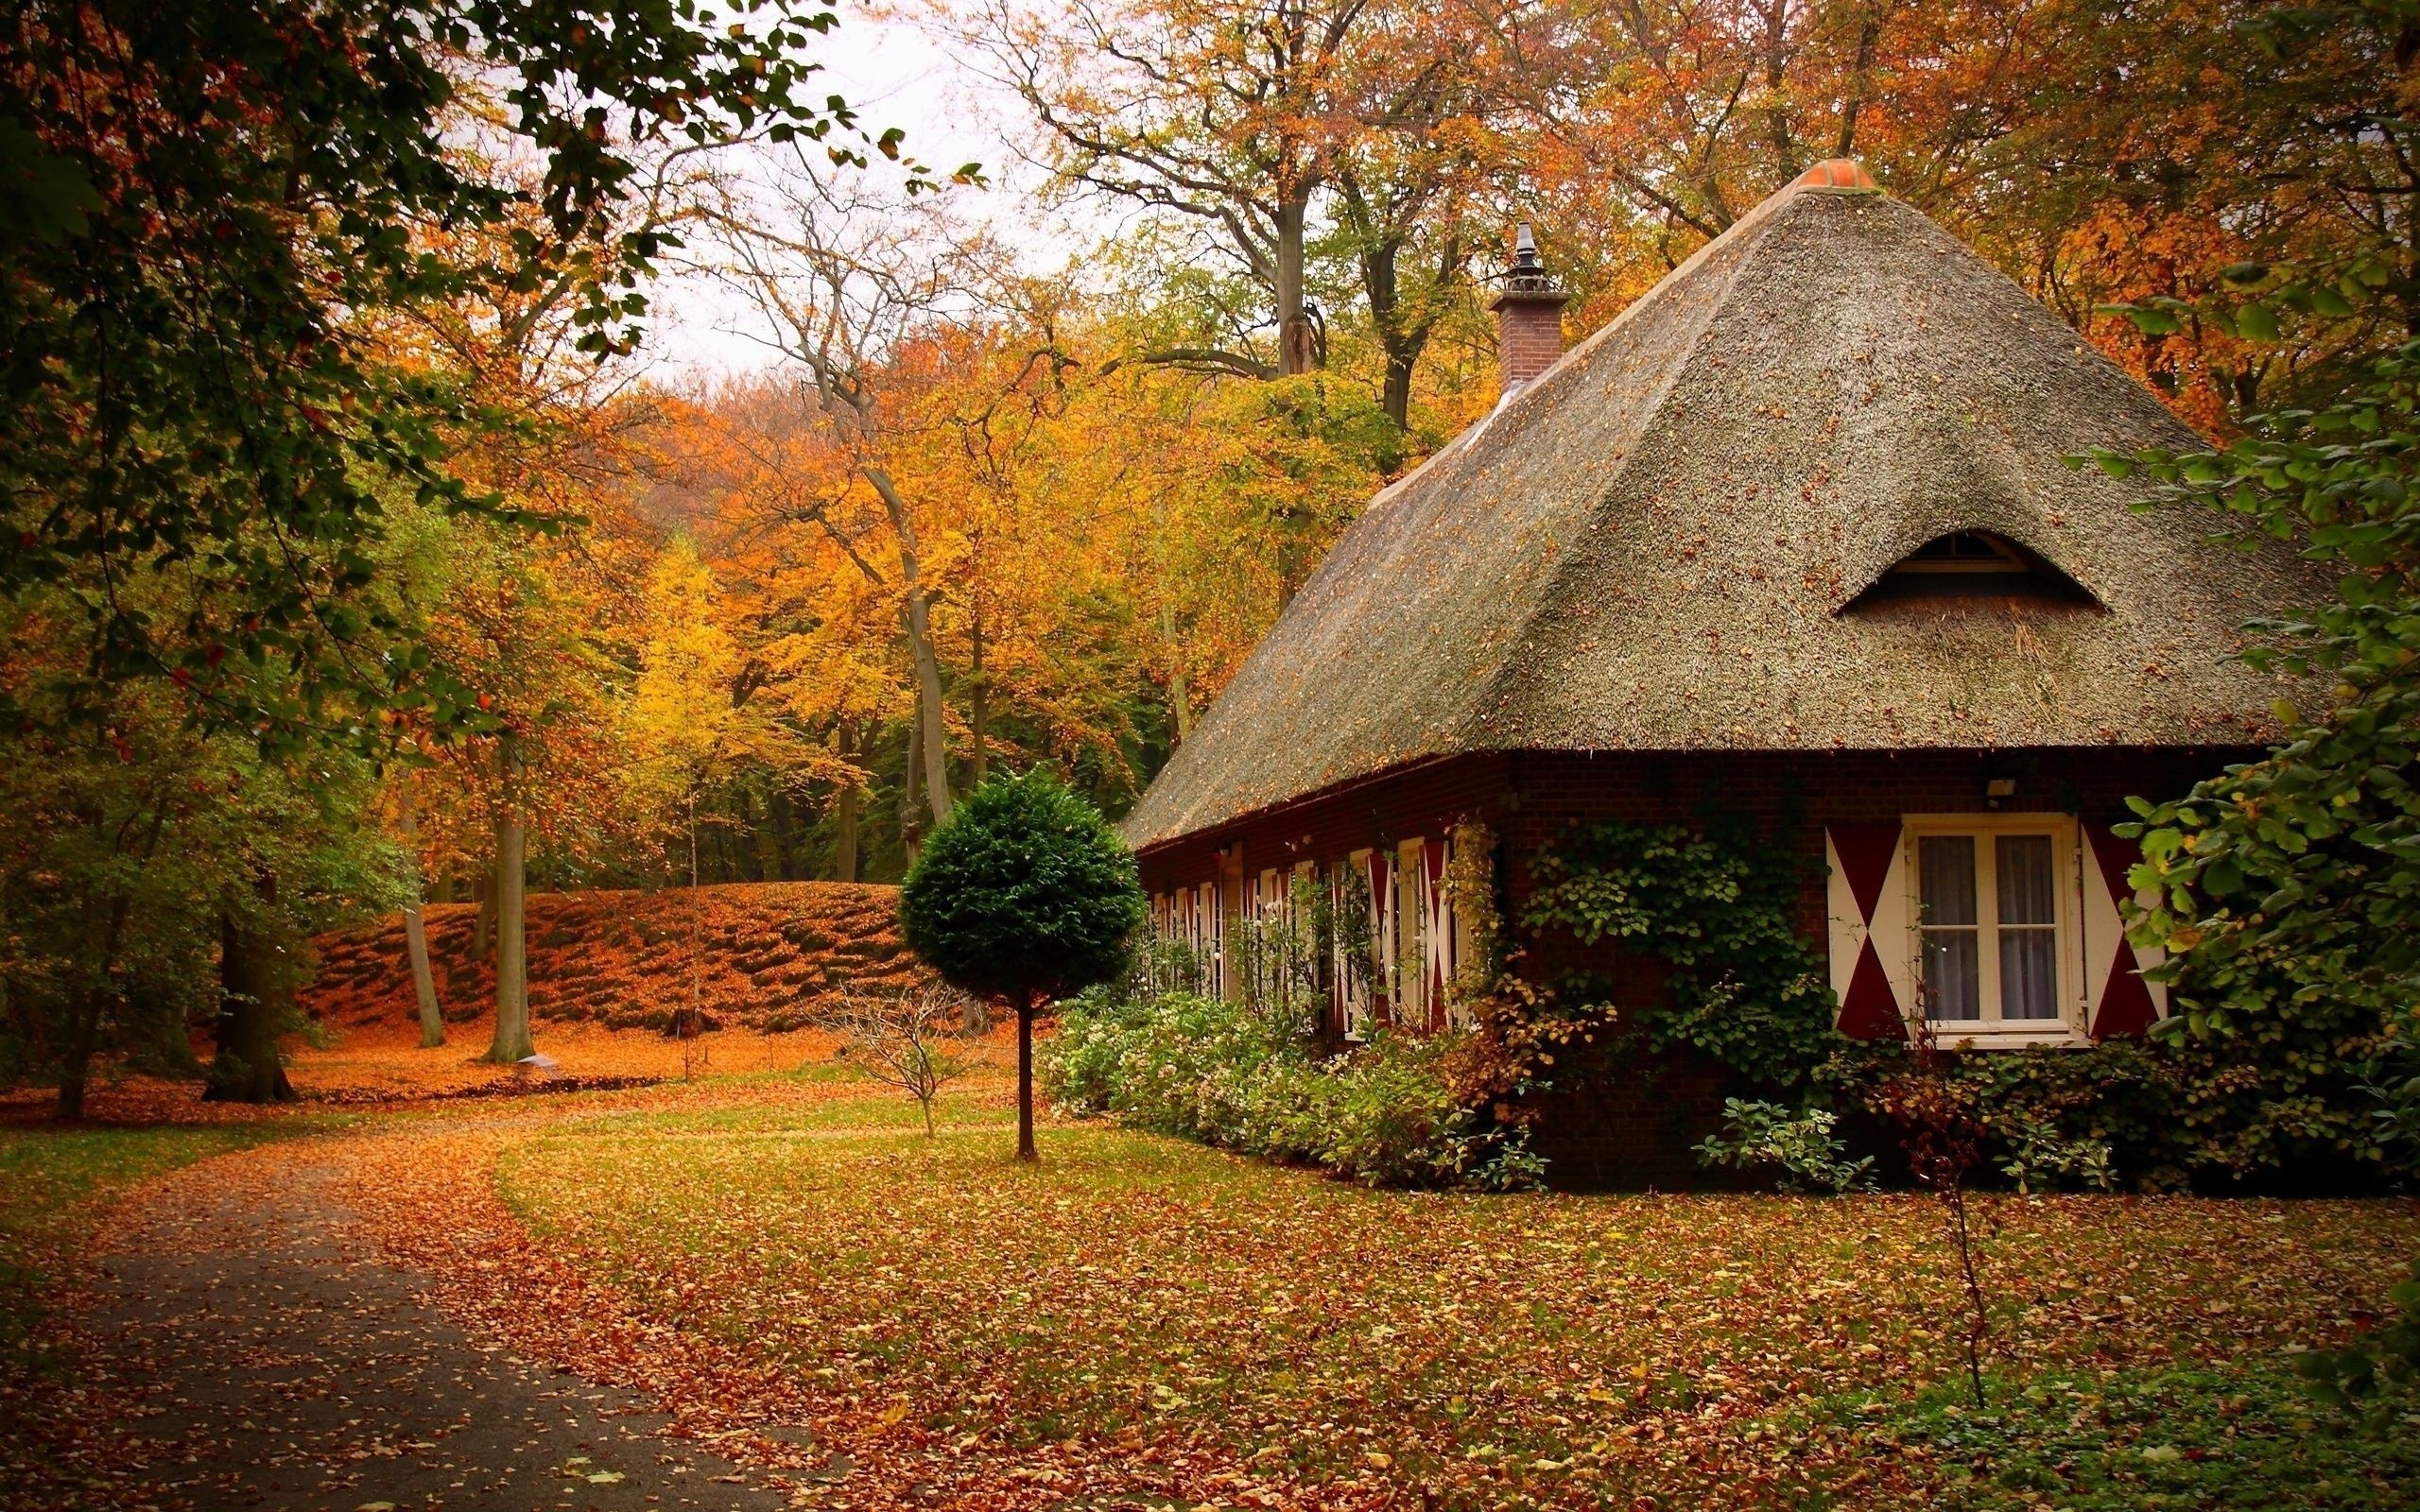 Country home wallpapers, Cozy charm, Rural landscapes, Serene atmosphere, 2560x1600 HD Desktop